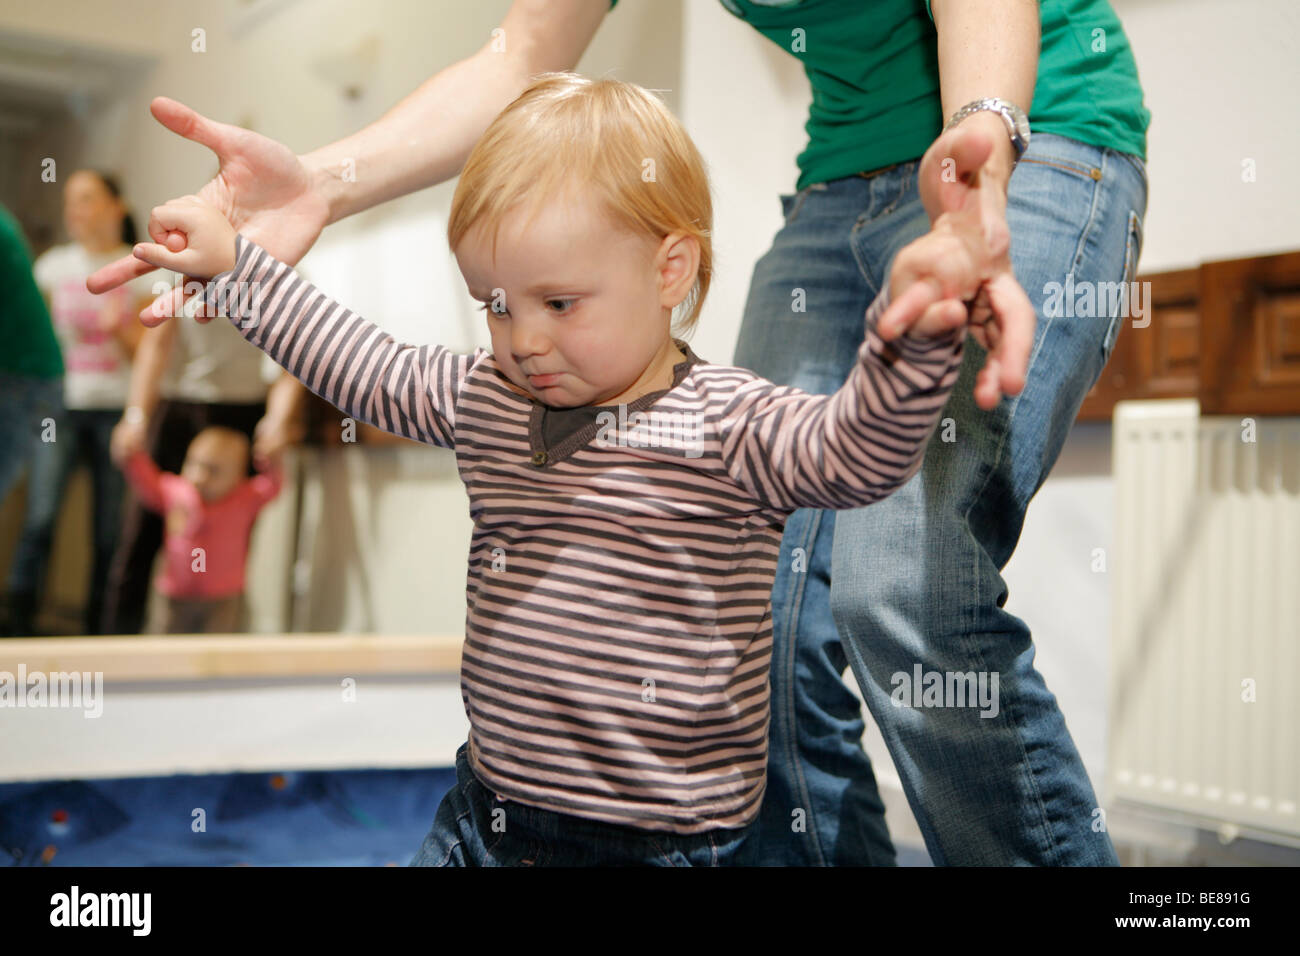 Mothers and children in baby center playing music. Baby music. Stock Photo